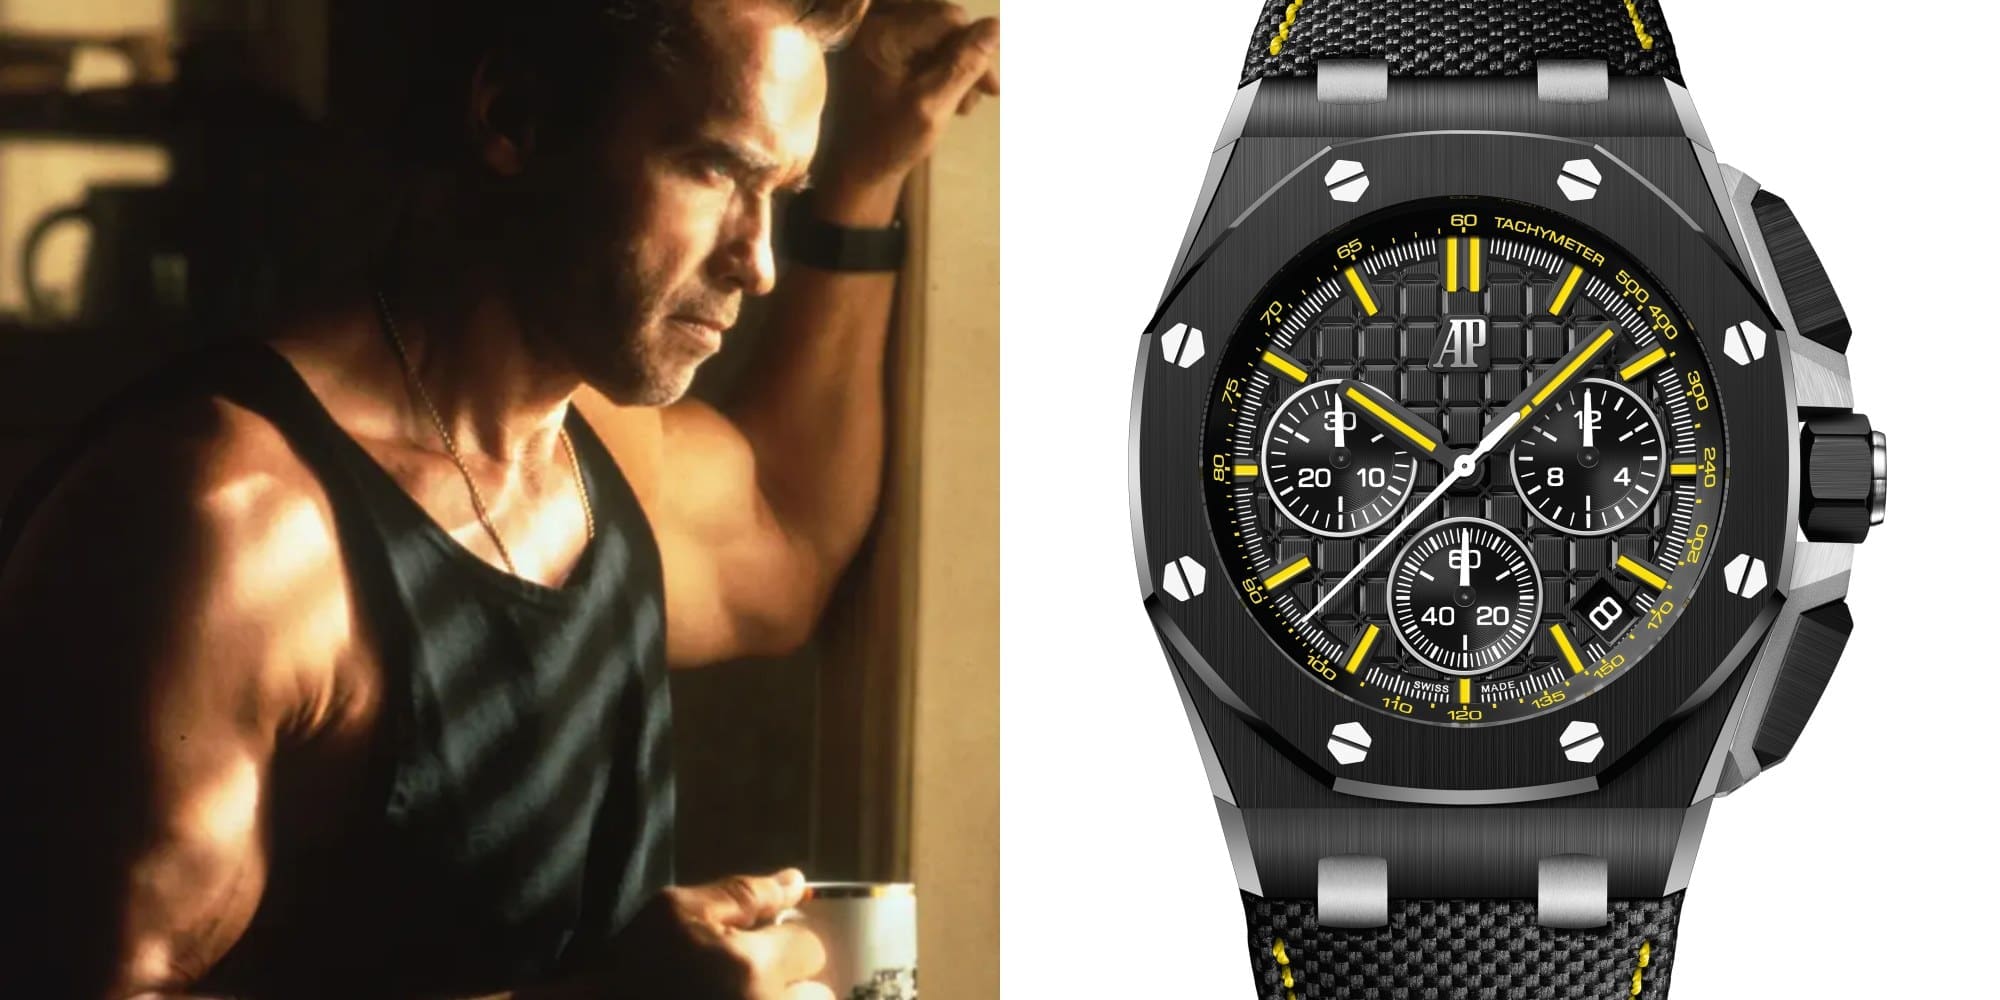 I’ll be back: The Audemars Piguet Royal Oak Offshore Selfwinding Chronograph pays homage to Arnie’s “End of Days” model